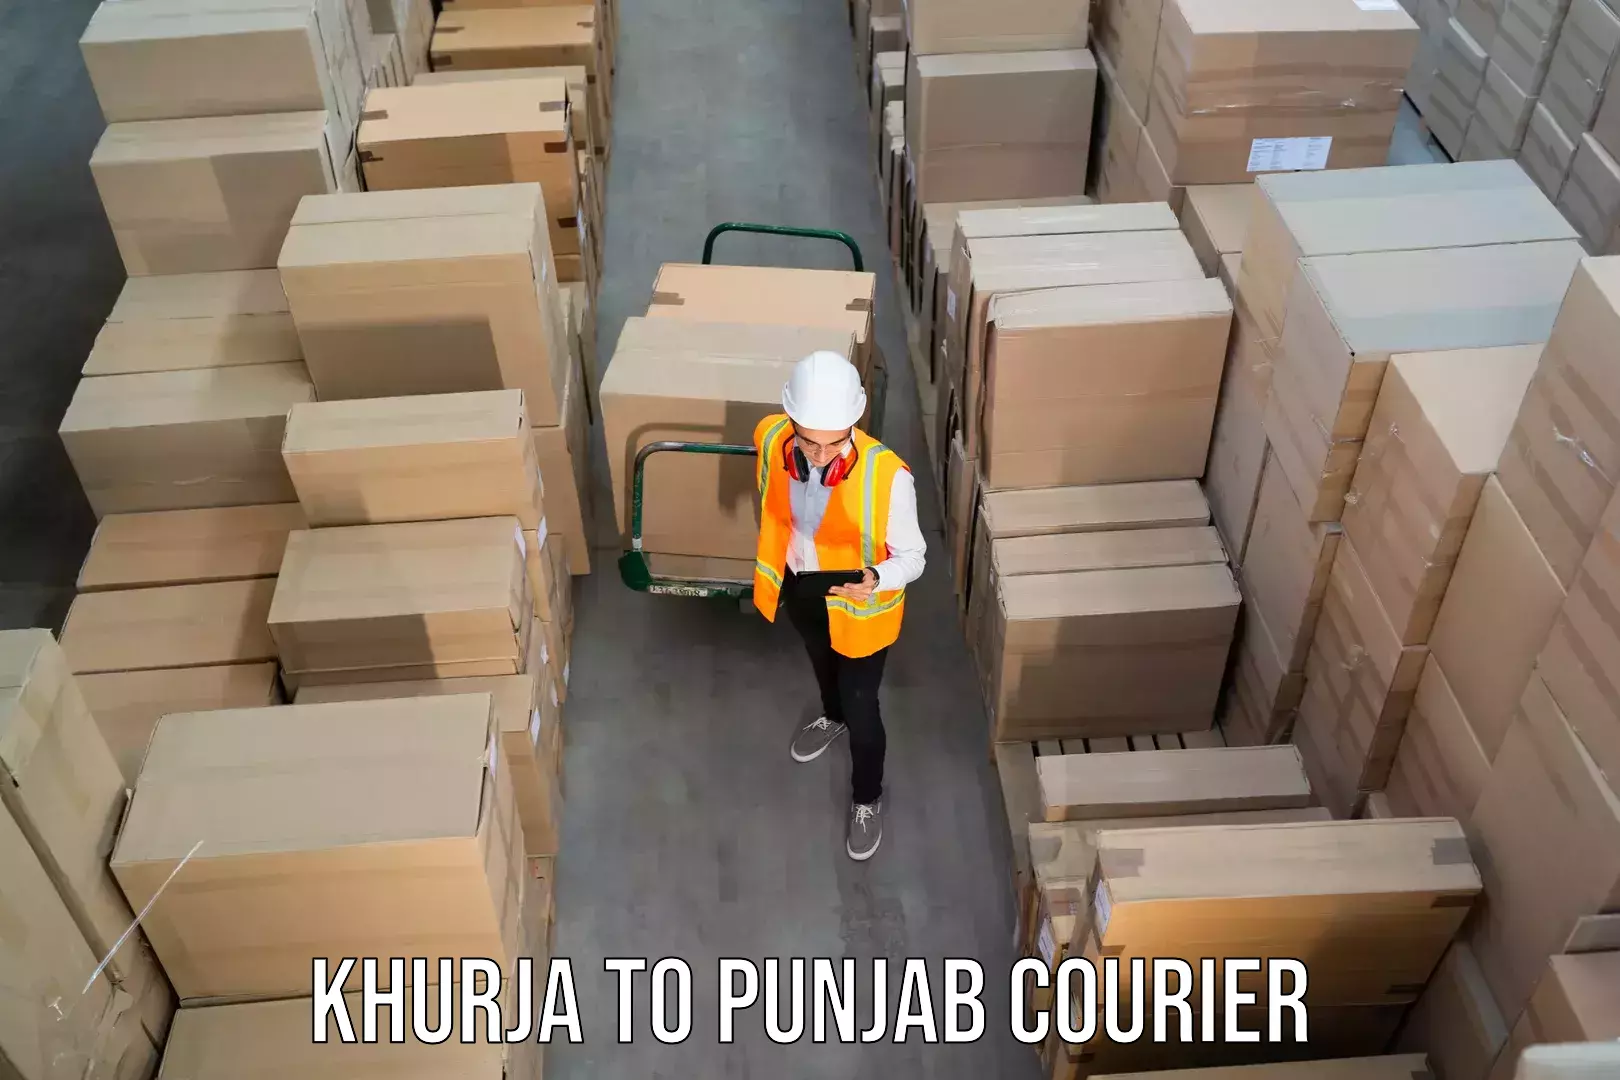 Express package services Khurja to Batala